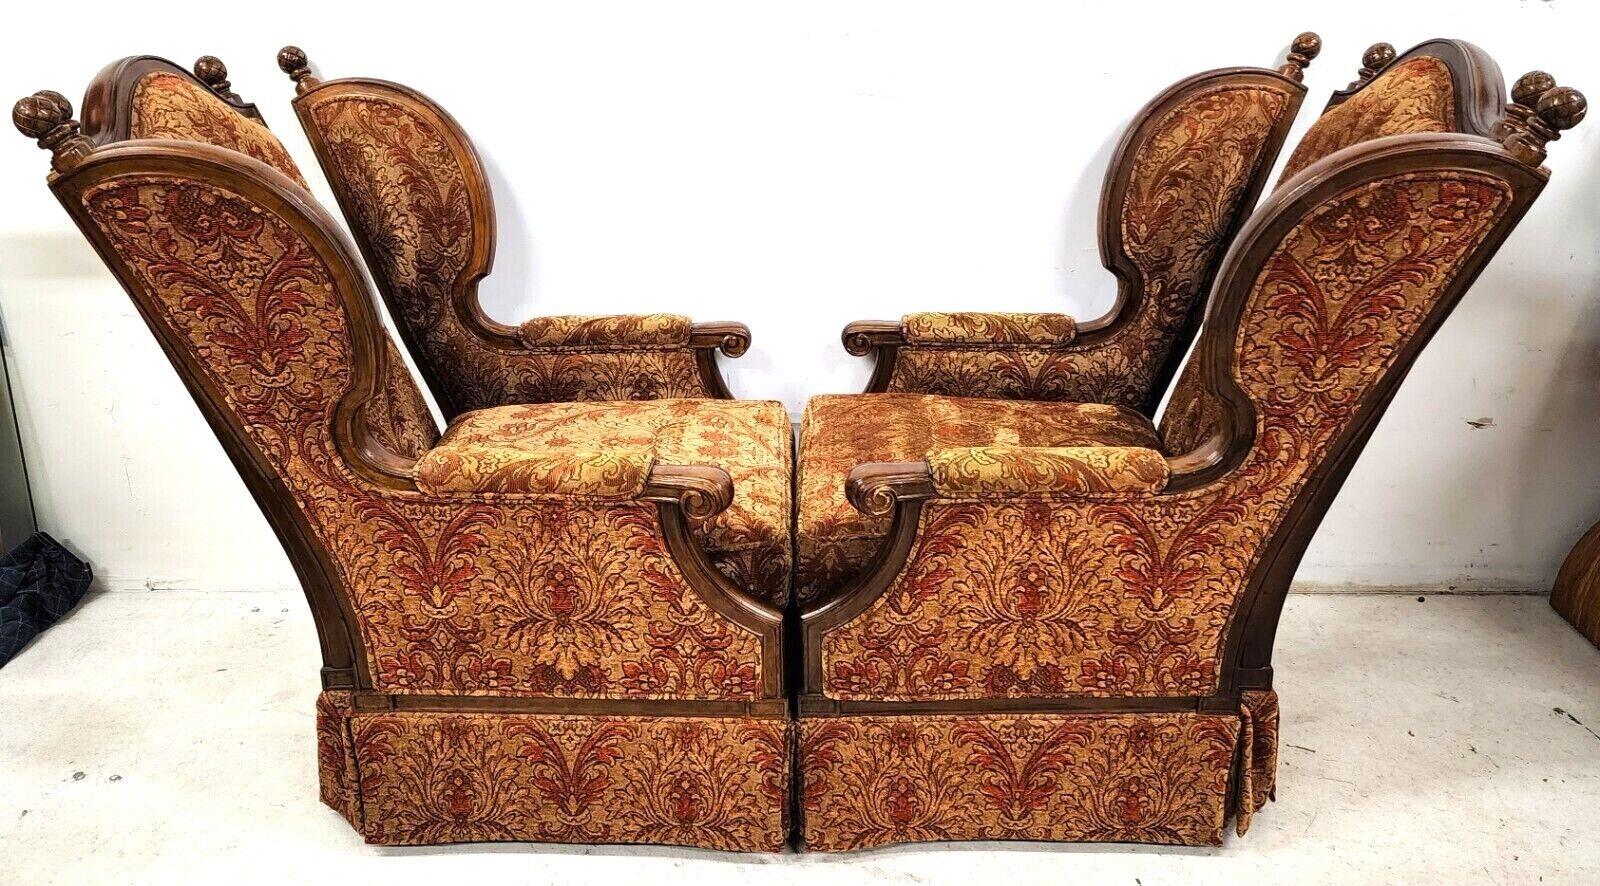 Offering One Of Our Recent Palm Beach Estate Fine Furniture Acquisitions Of An
Pair of Oversized Regal French Wingback Damask Armchairs by CENTURY FURNITURE
With heavy Cotton Damask fabric.

Approximate Measurements in Inches
48